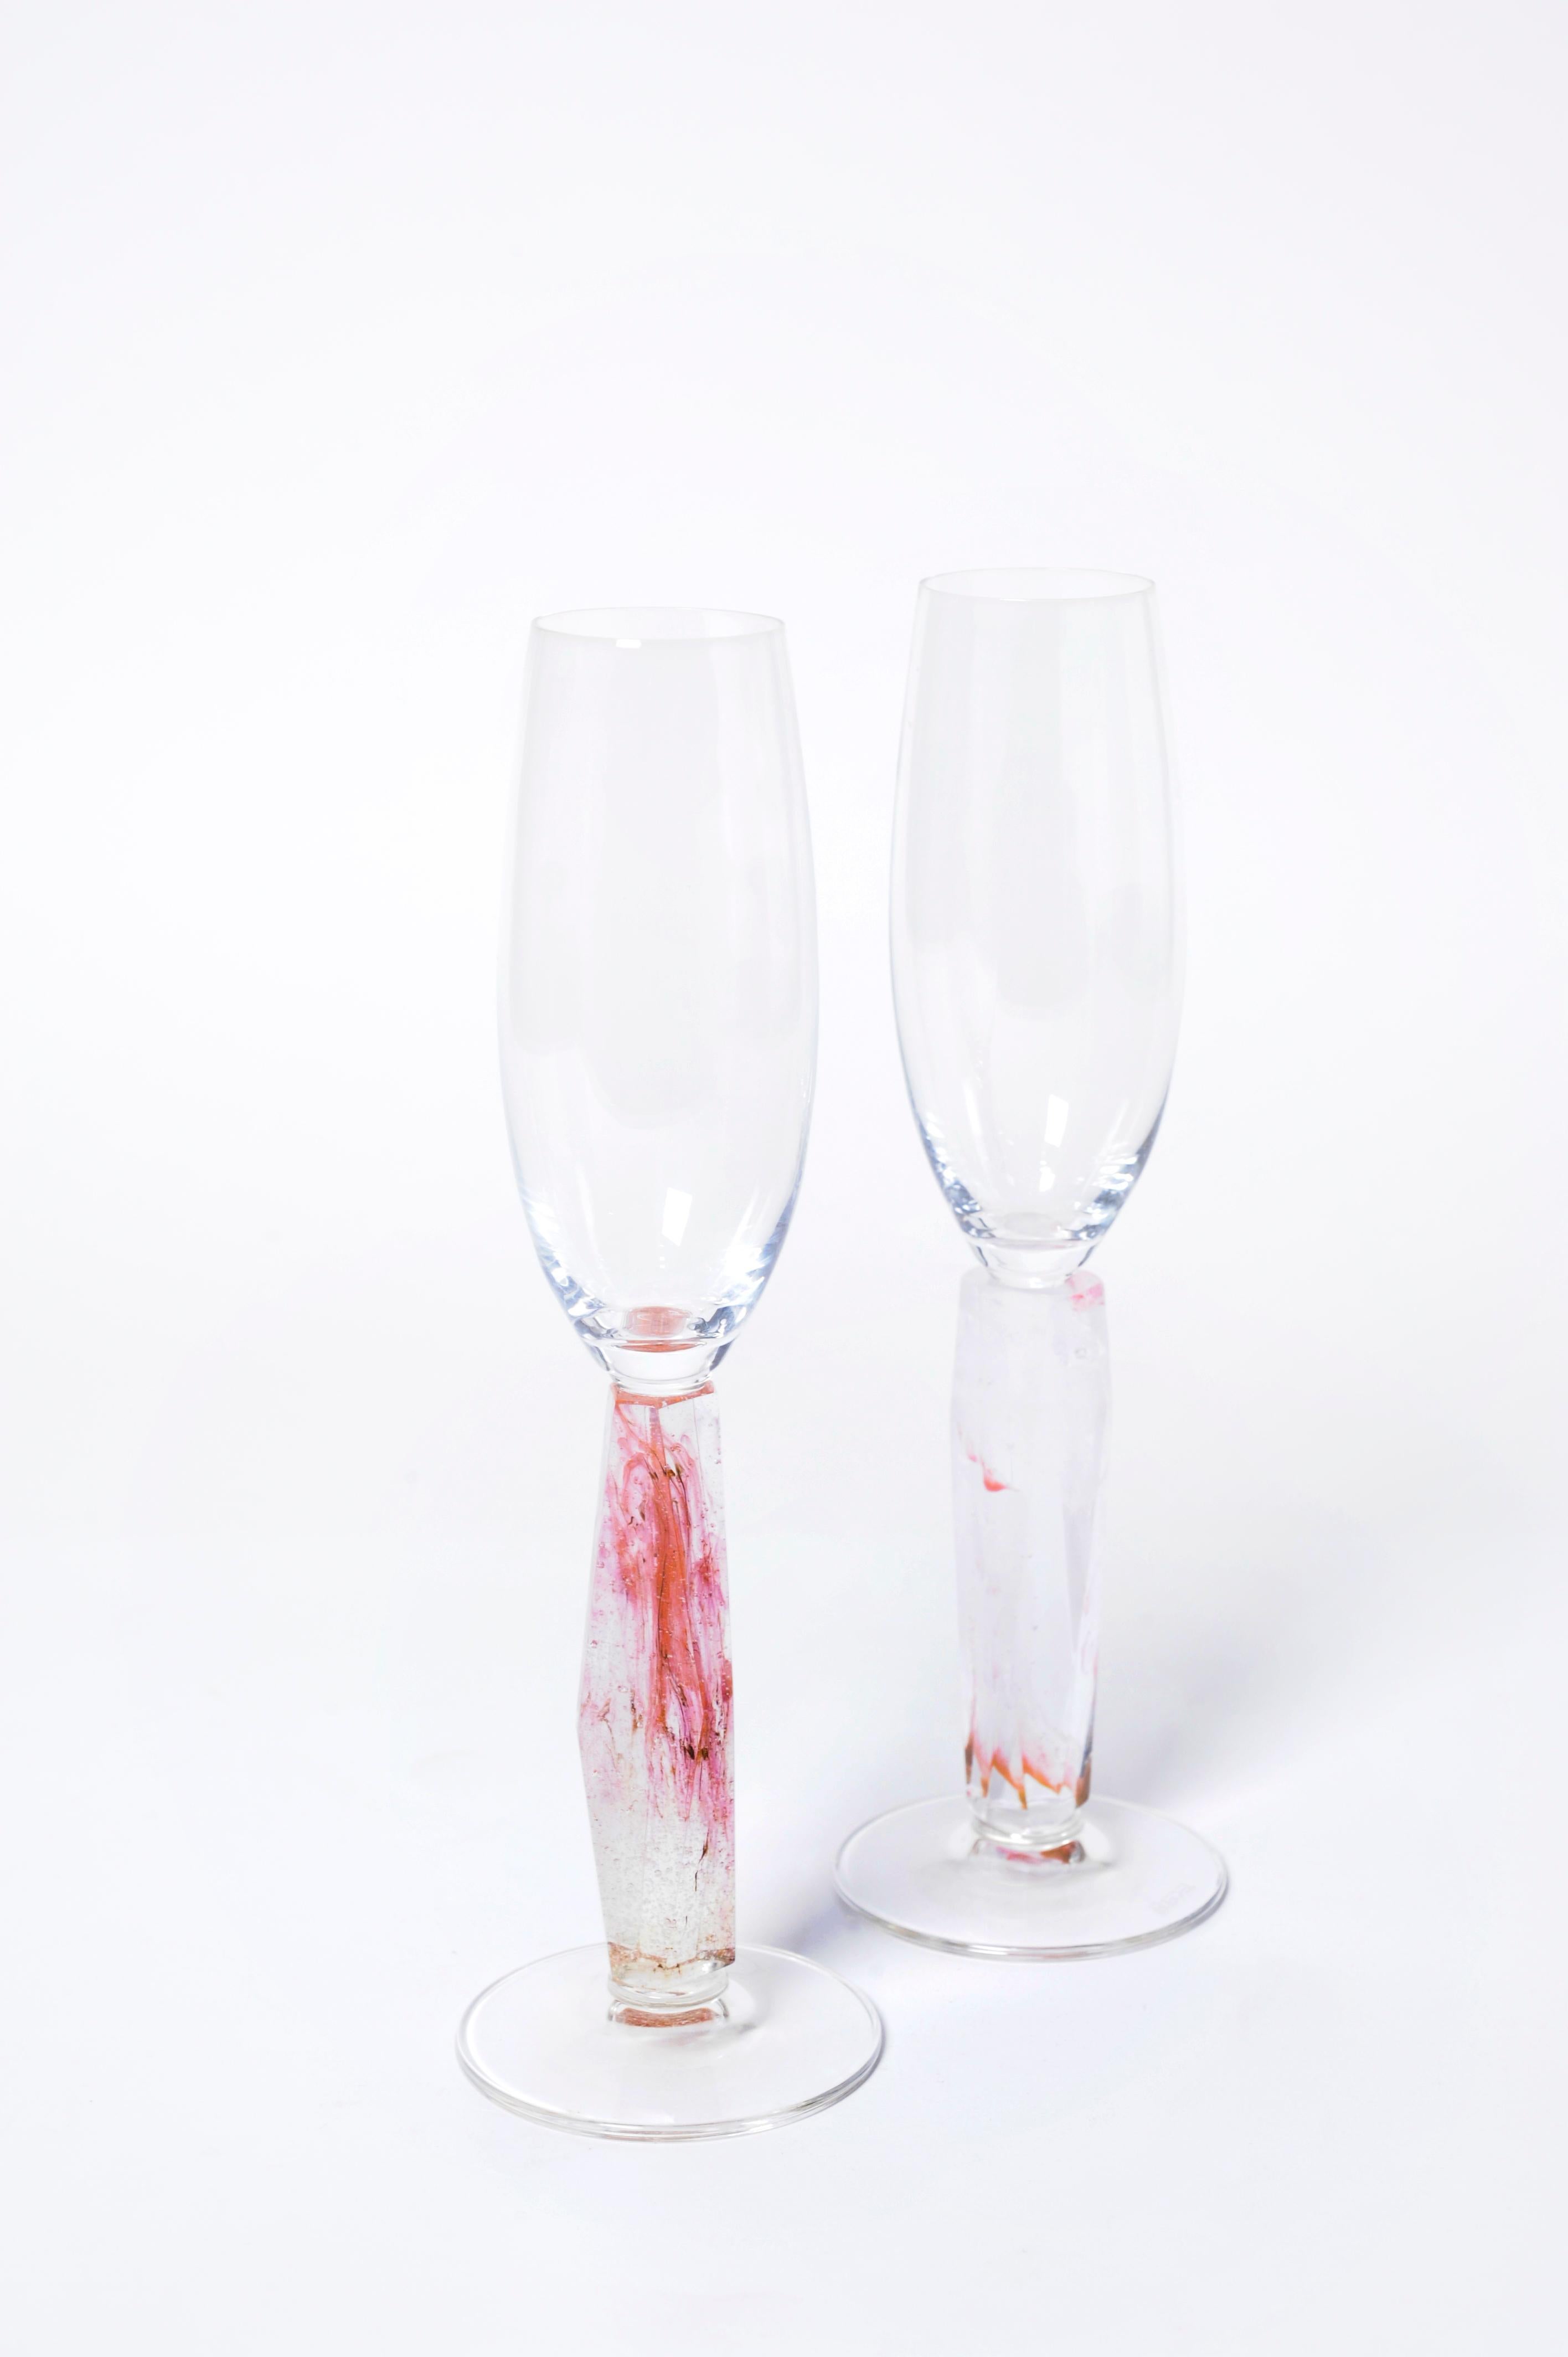 The new design of Orfeo Quagliata, a set of Four wine glasses made by hand with the highest quality crystal.
Each facet of the handle is made one by one to later be polished in our workshop.
Touches of color that remain suspended in time with the